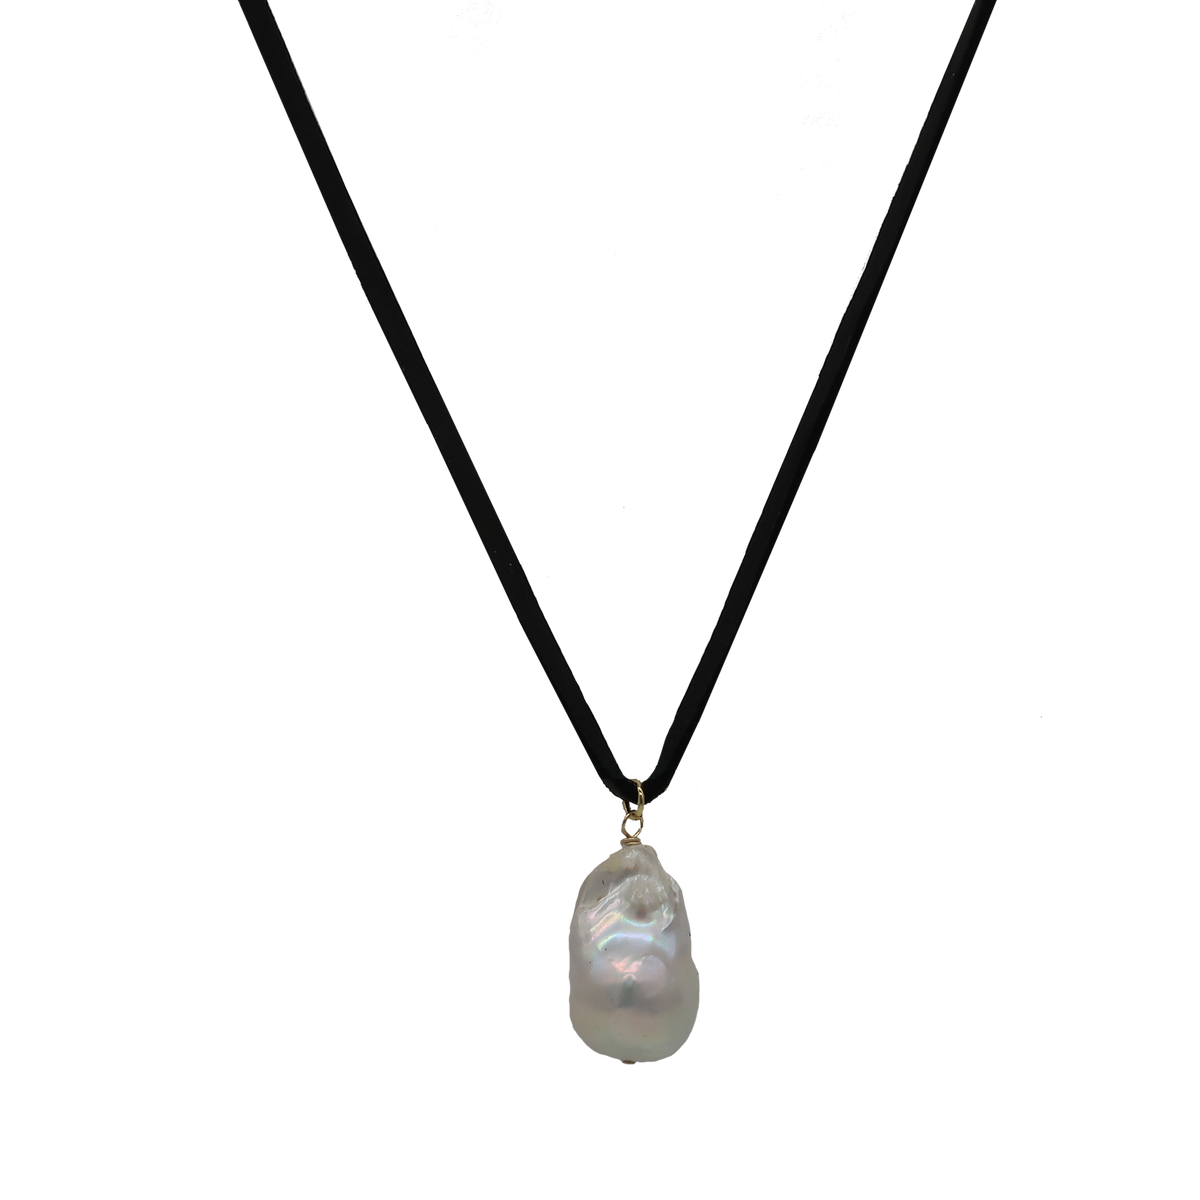 BAROQUE PEARL PENDANT ON LEATHER